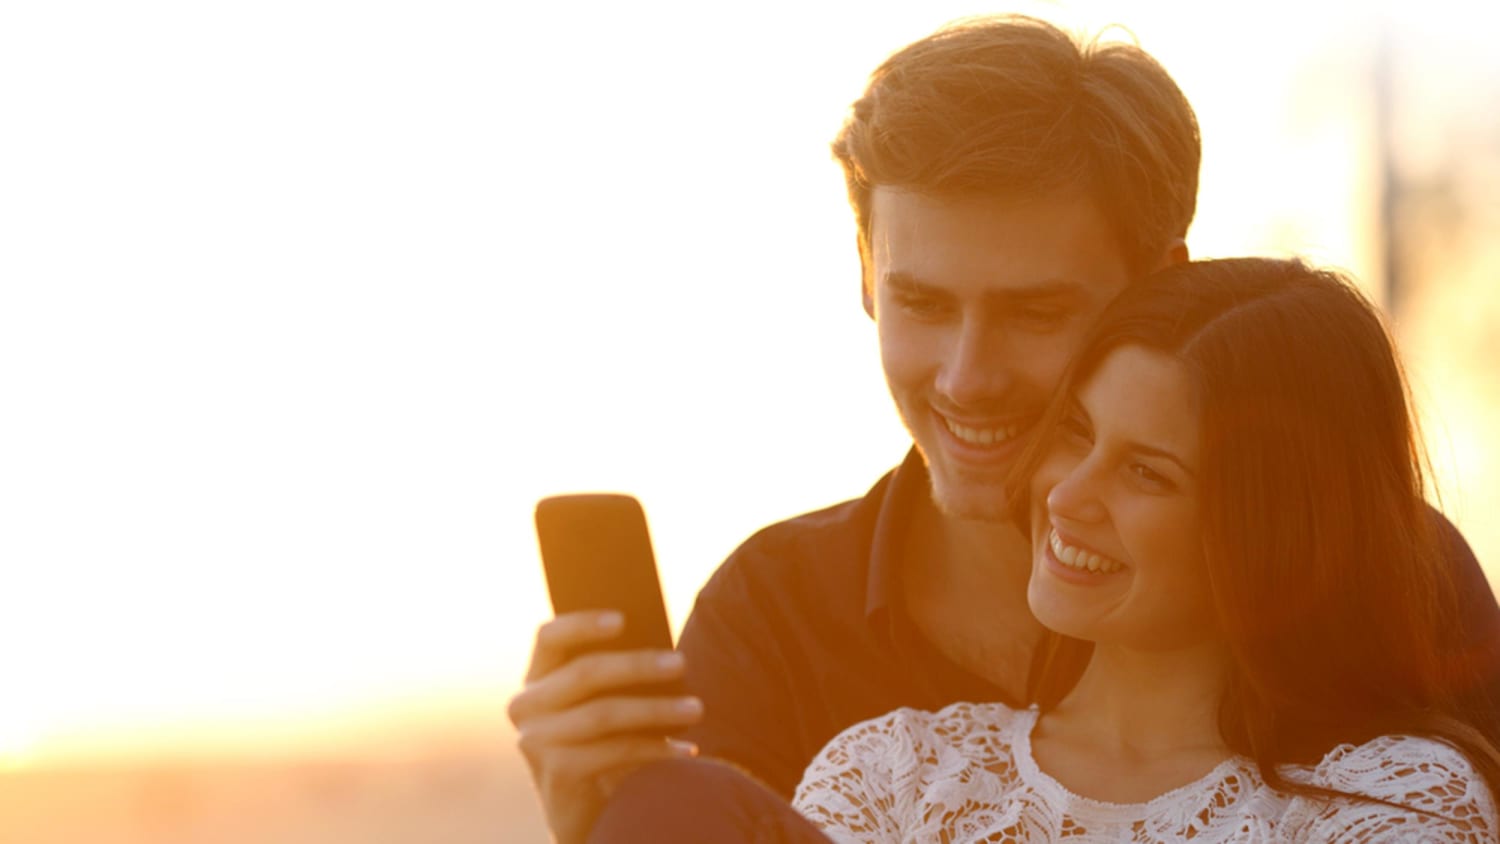 Religion and online dating: How young singles are finding love within their...